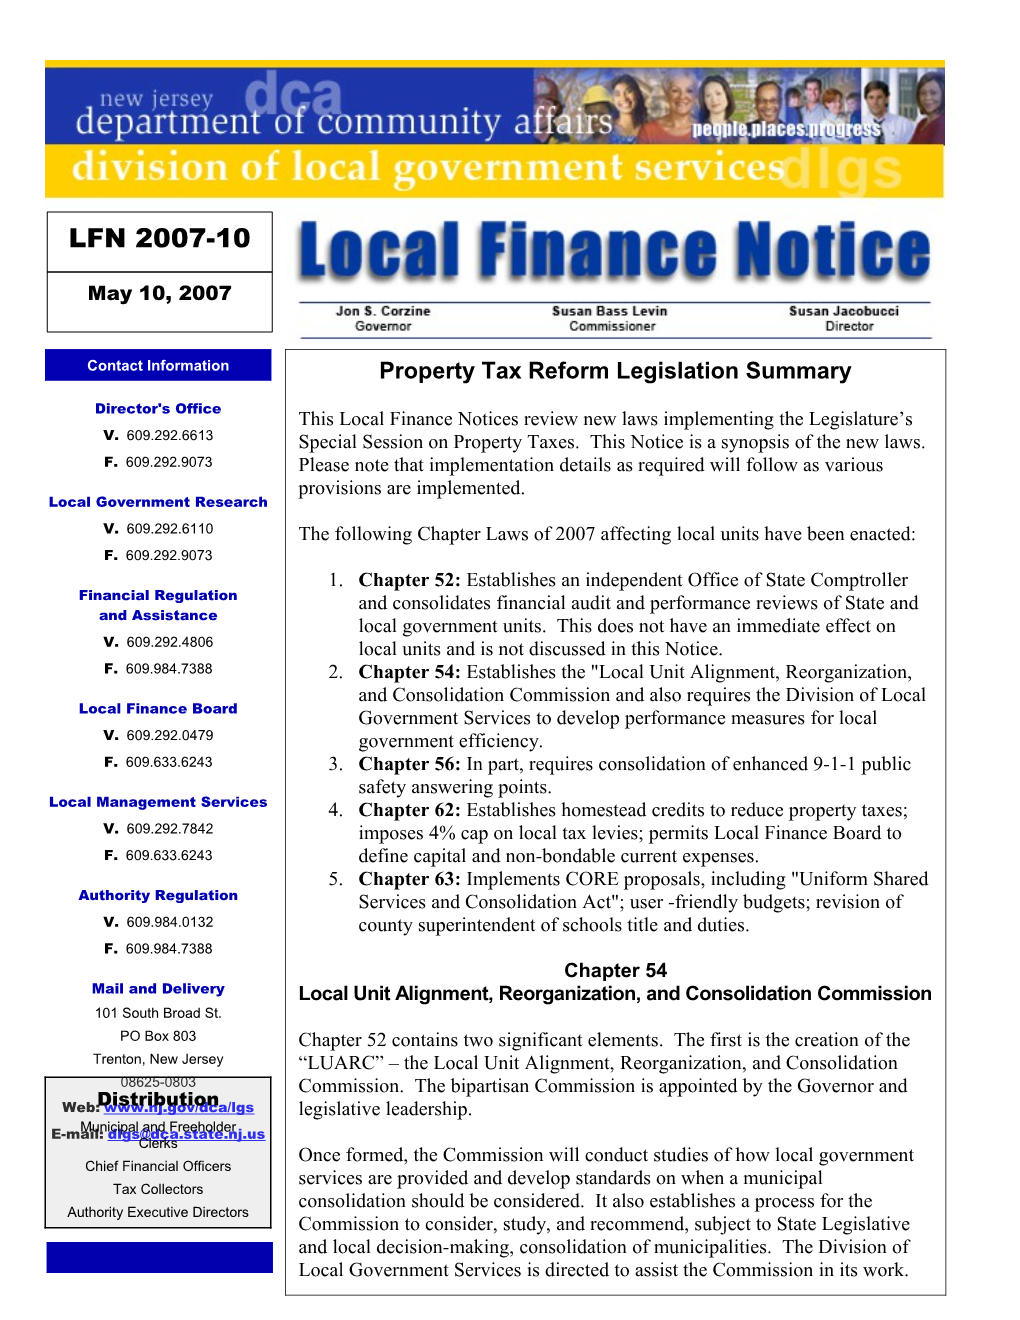 Local Finance Notice 2007-10 May 11, 2007 Page 4